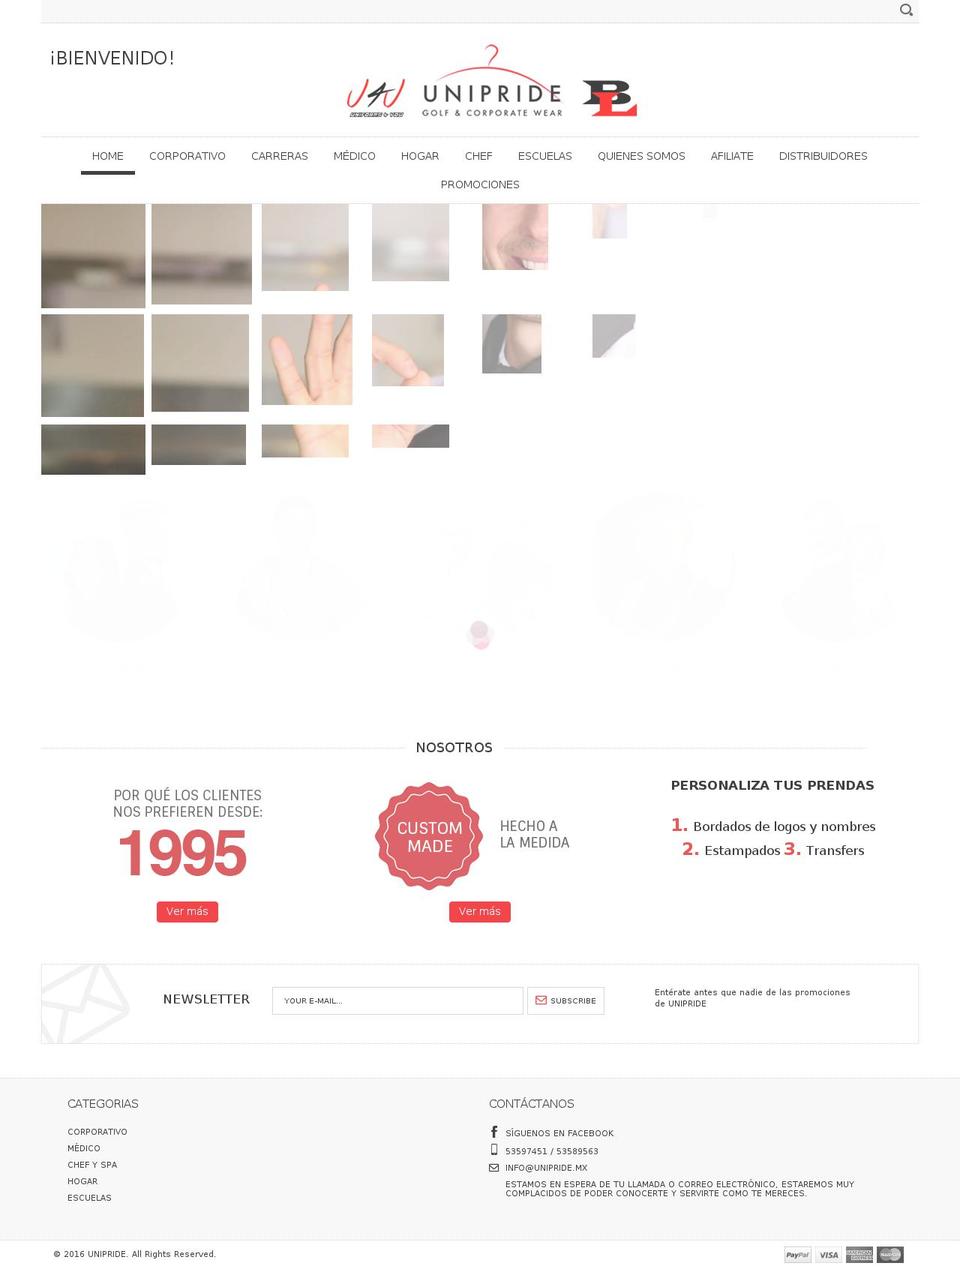 coolbaby-v1-30 Shopify theme site example unipride.mx